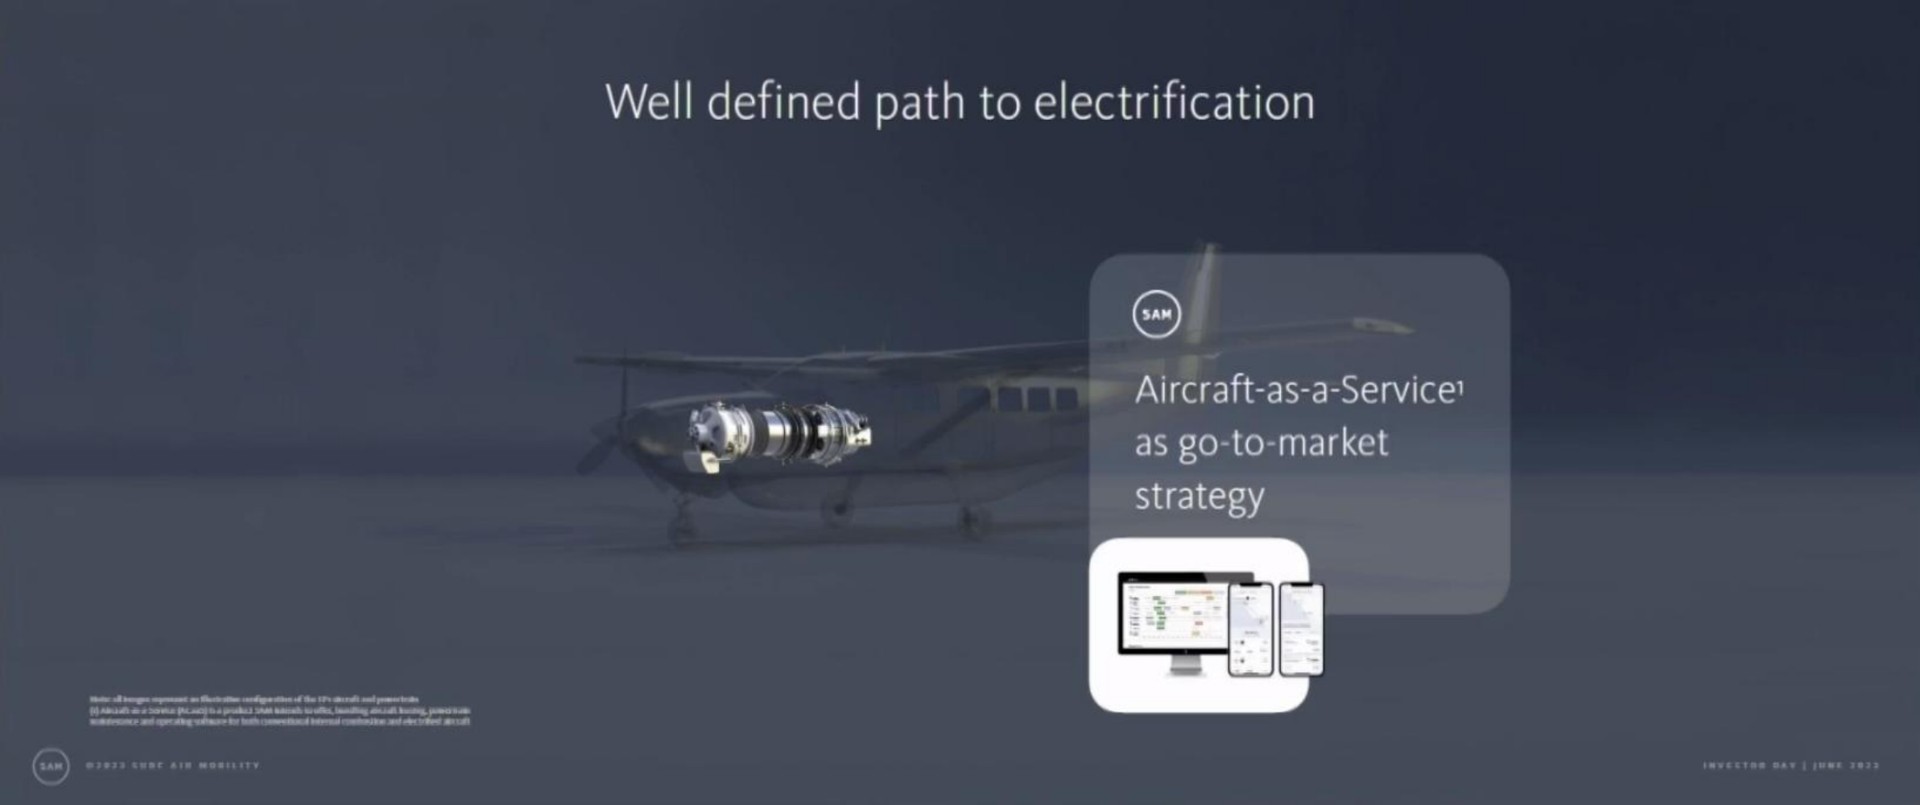 well defined path to electrification he aircraft as a service as go to market | Surf Air